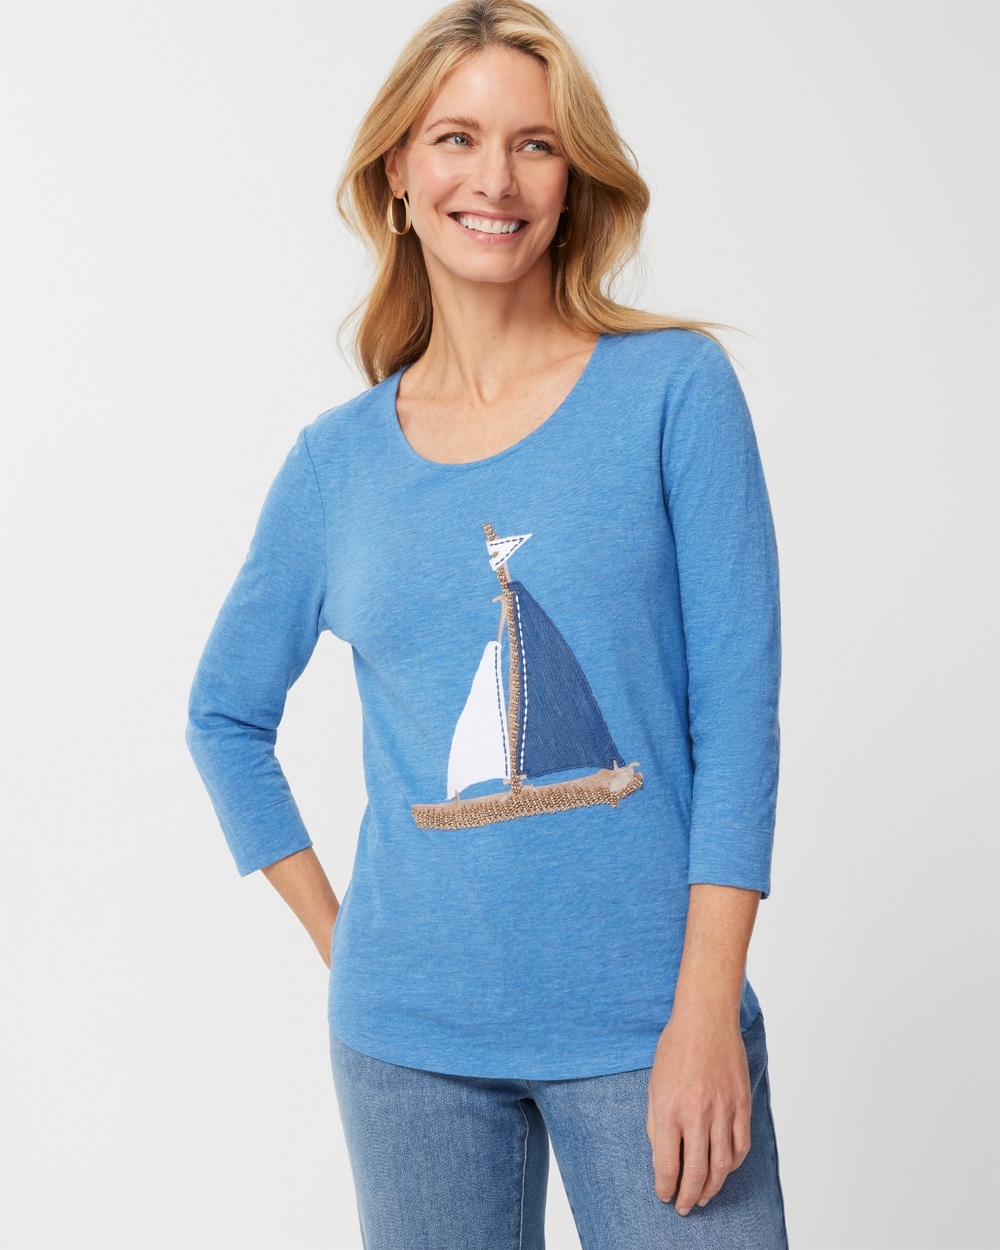 Patched Sail Boat Tee